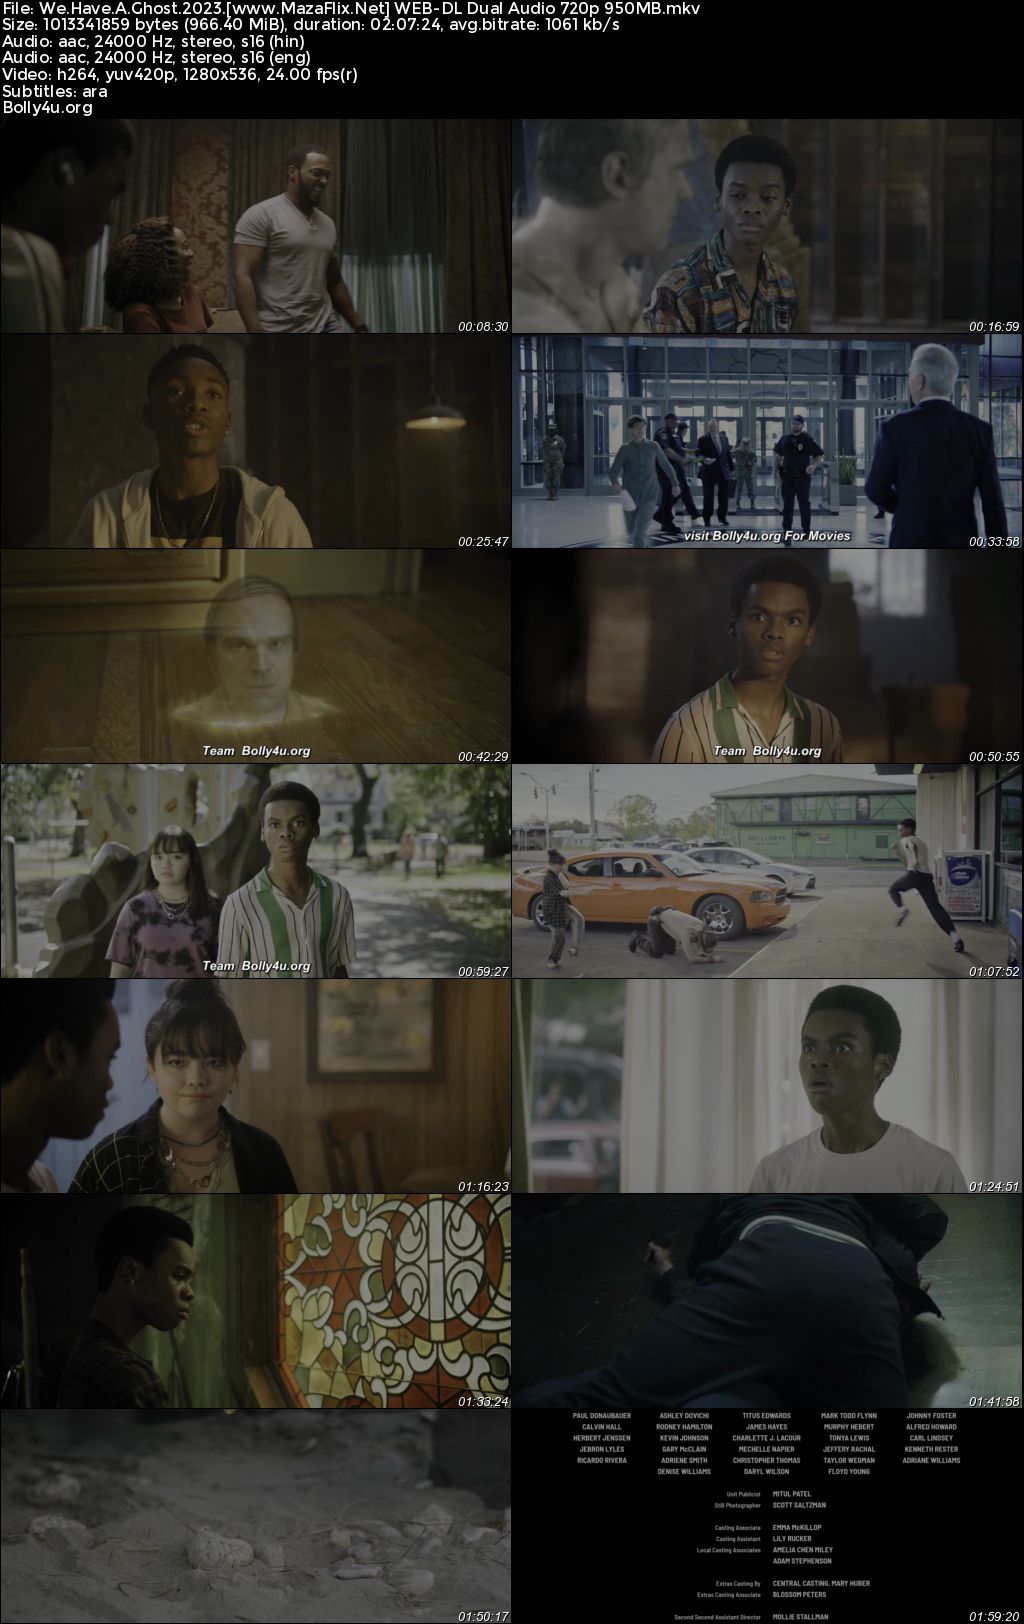 We Have A Ghost 2023 WEB-DL Dual Audio ORG Full Movie Download 1080p 720p 480p